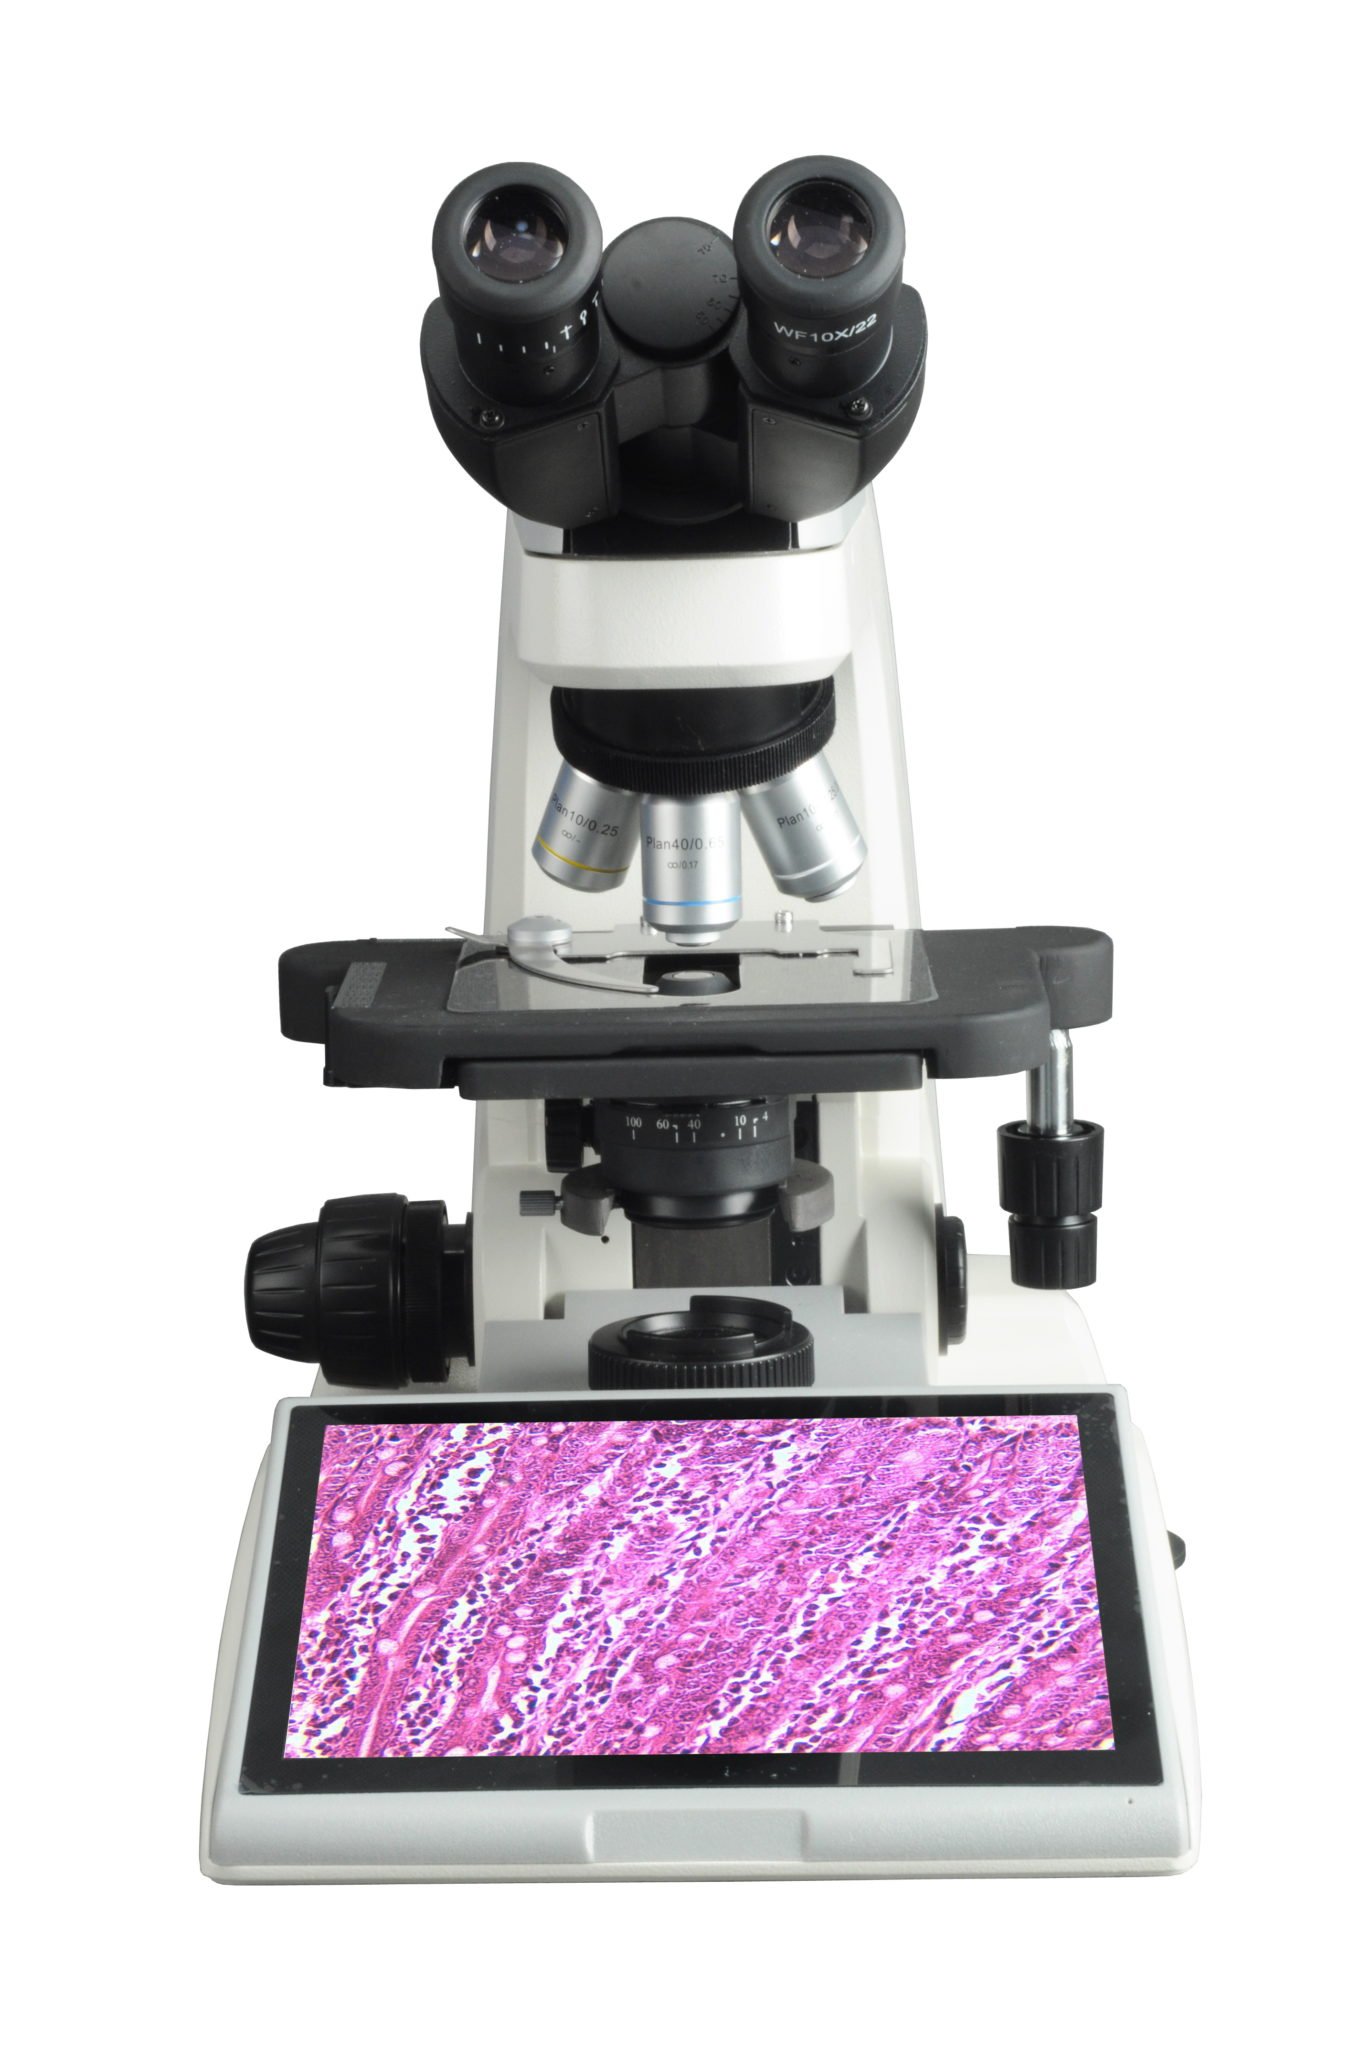 BUM340L-16MP Upright Biological/Clinical Microscope with 16MP Camera & 9.7" Touch Screen-10281